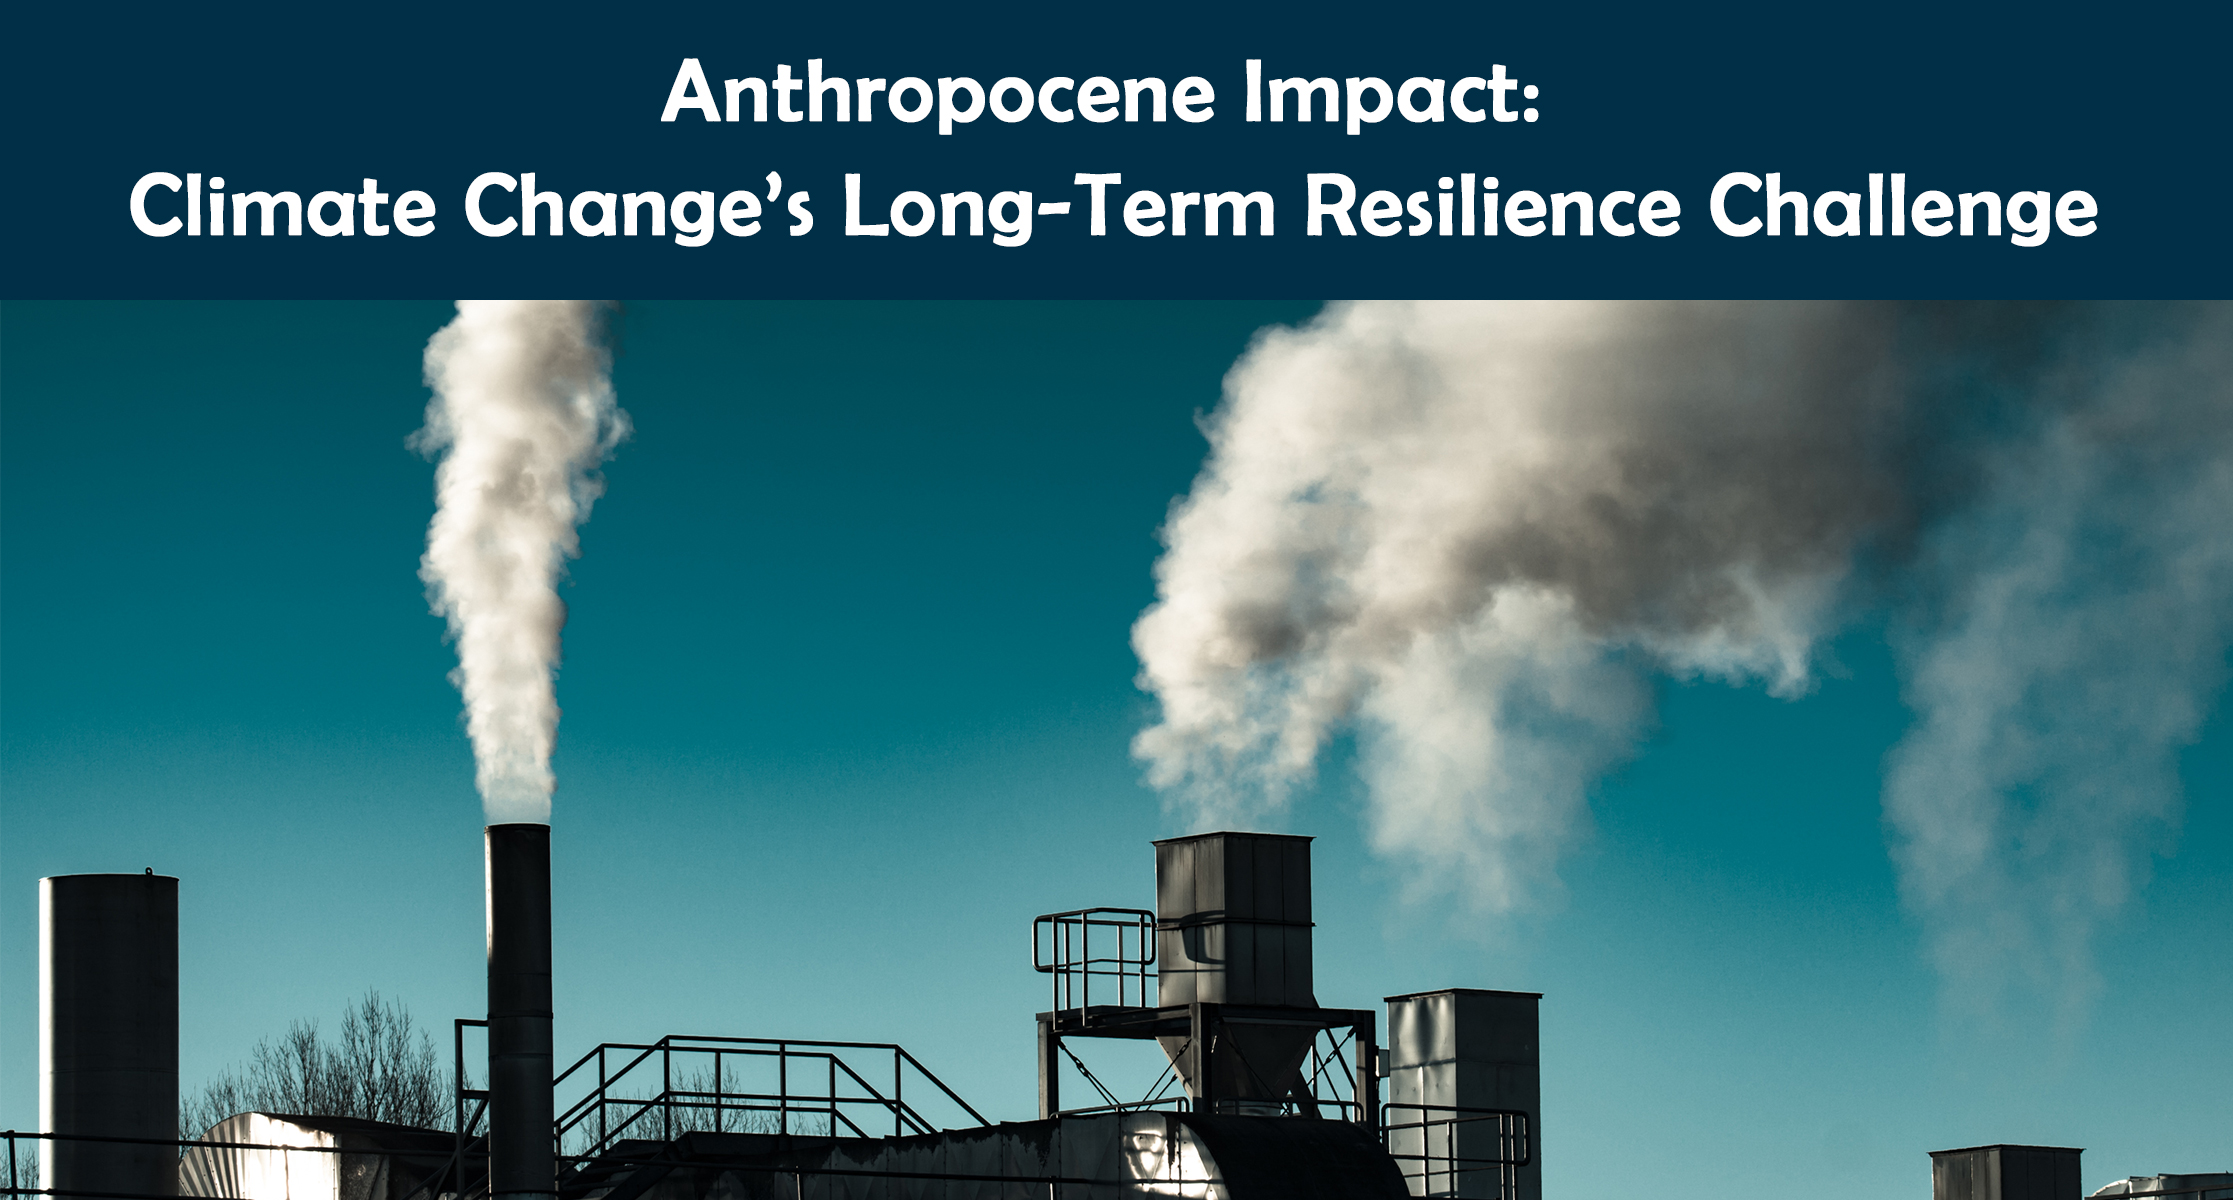 Anthropocene Impact: Climate Change’s Long-Term Resilience Challenge